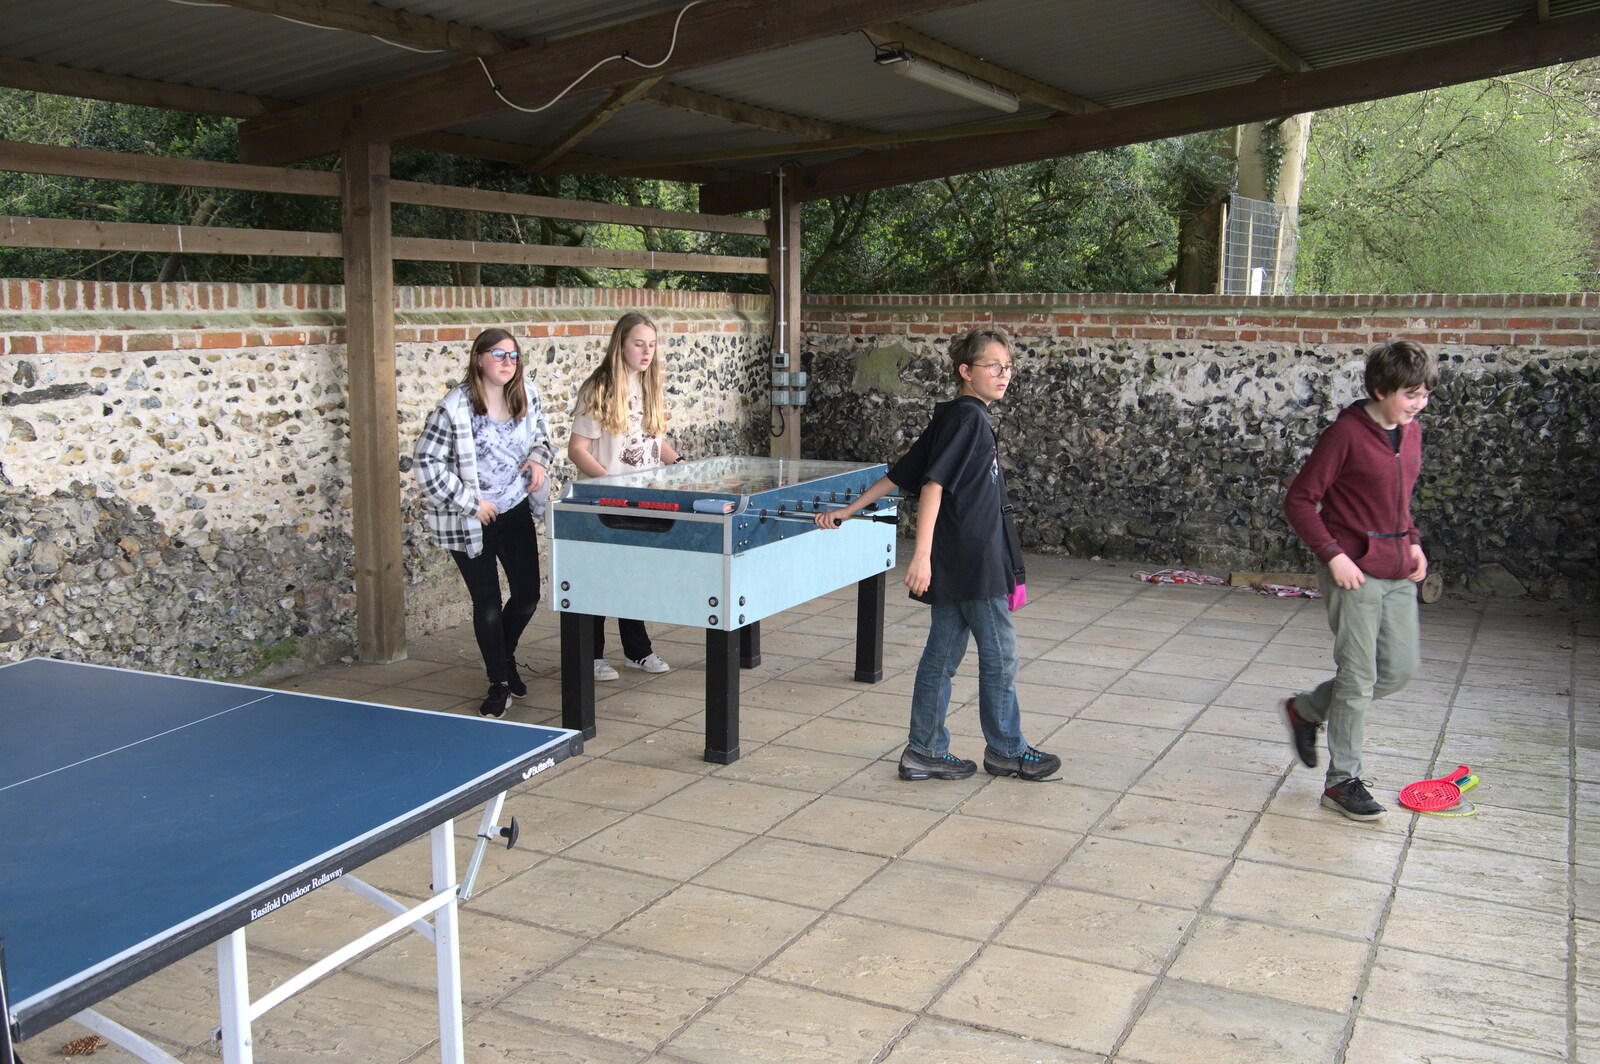 A Camper-Van Trip, West Harling, Norfolk - 13th April 2022: A game of table football is abandoned